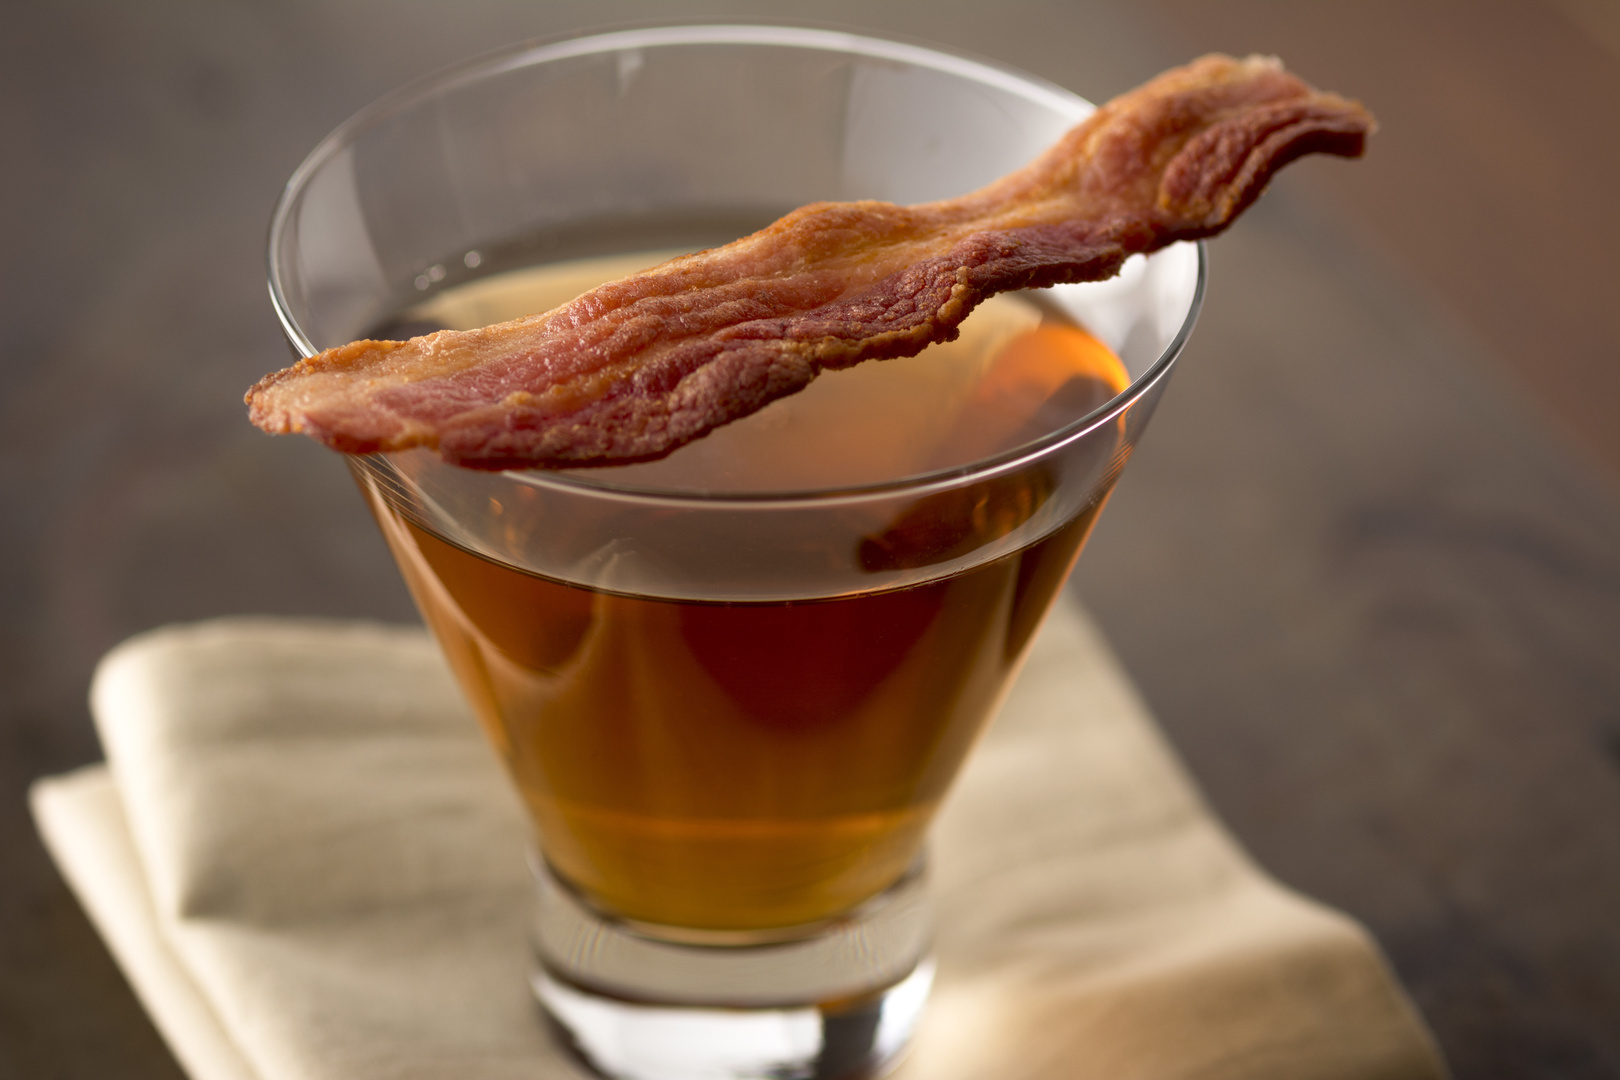 A Few of My Favorite Things - Beer, Bourbon, and Bacon! [October 3], Cambridge, Massachusetts, United States